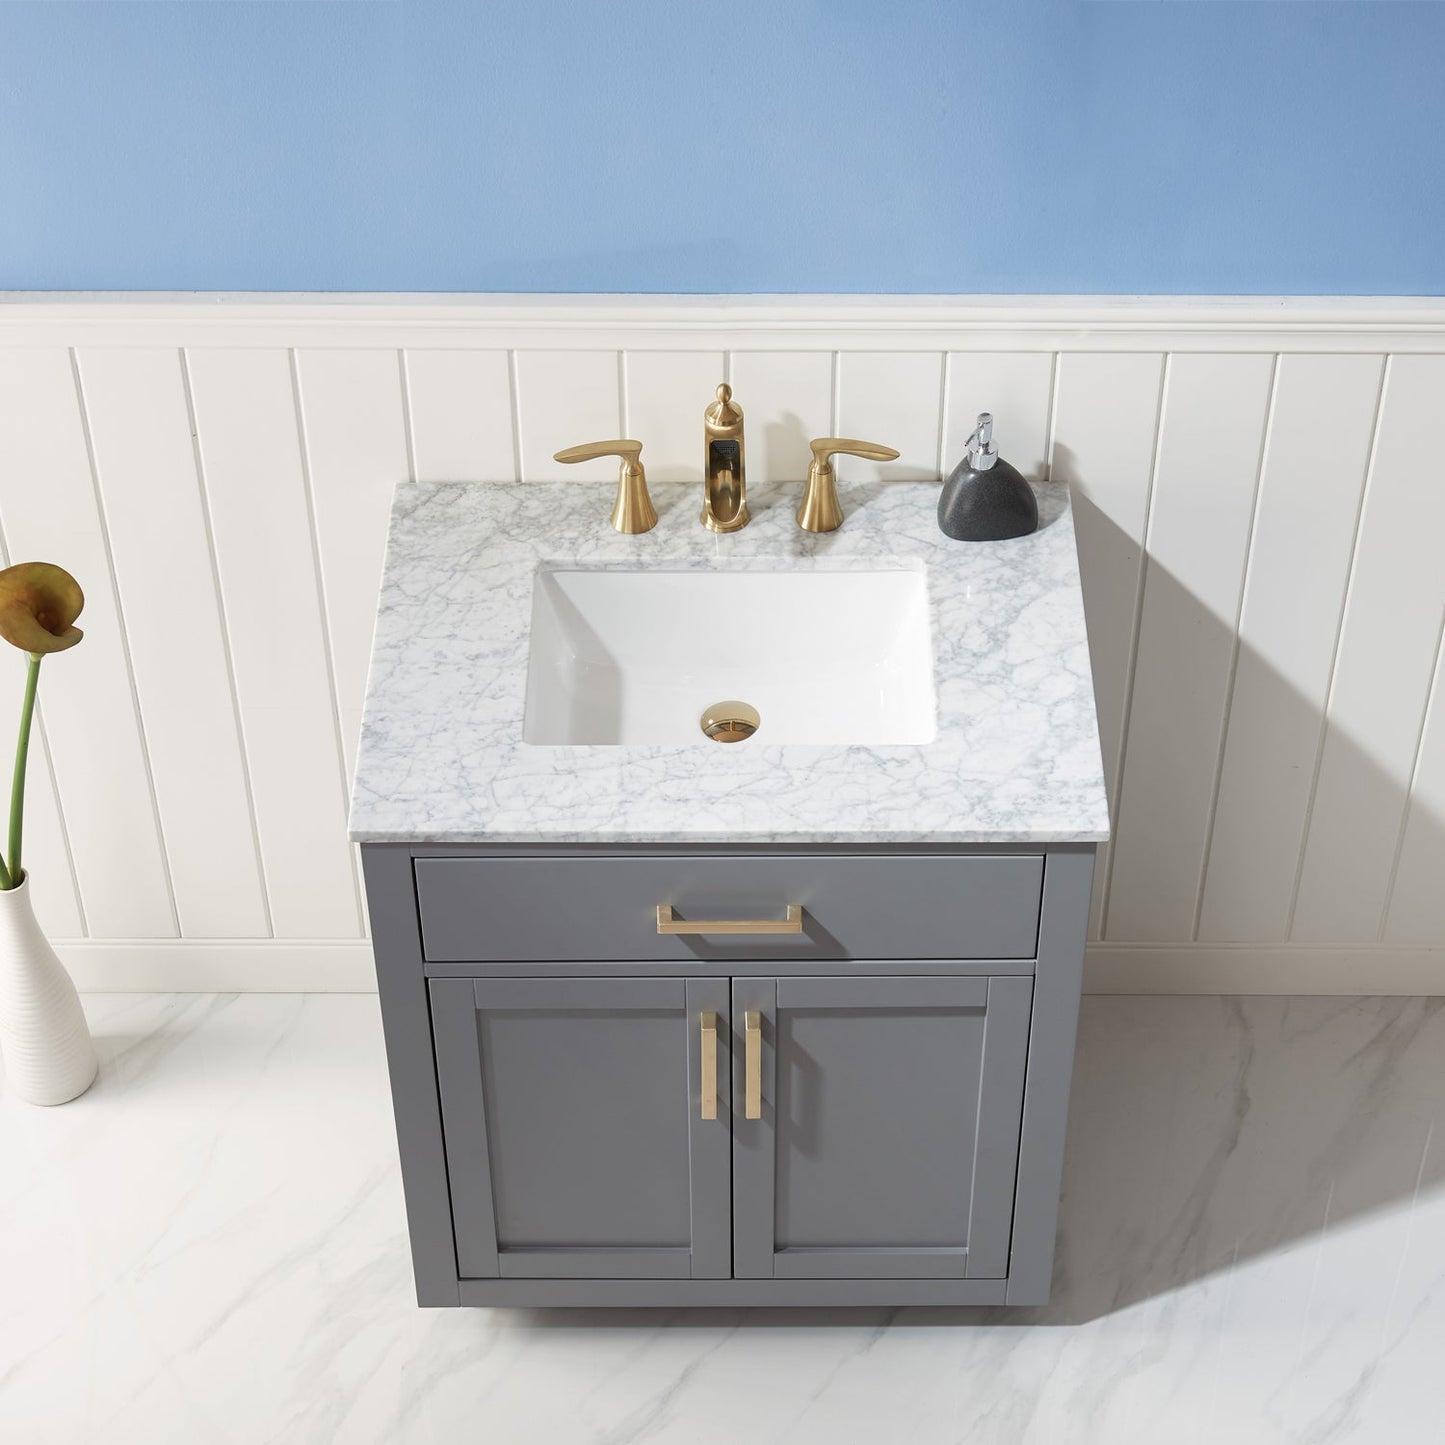 Ivy 30" Single Bathroom Vanity Set in Gray and Carrara White Marble Countertop without Mirror